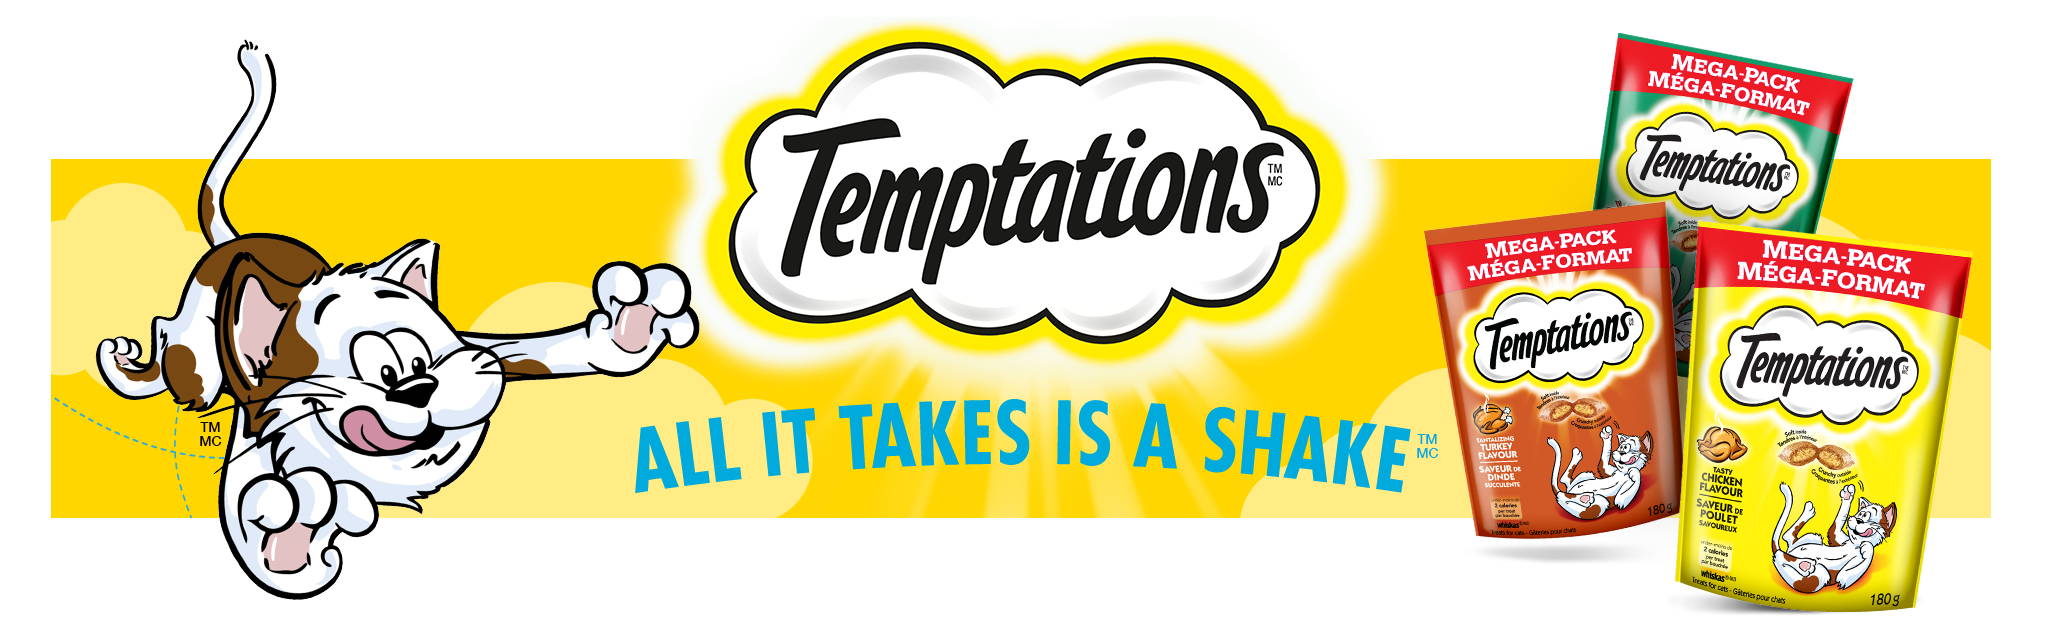 Temptations - All it takes is a shake